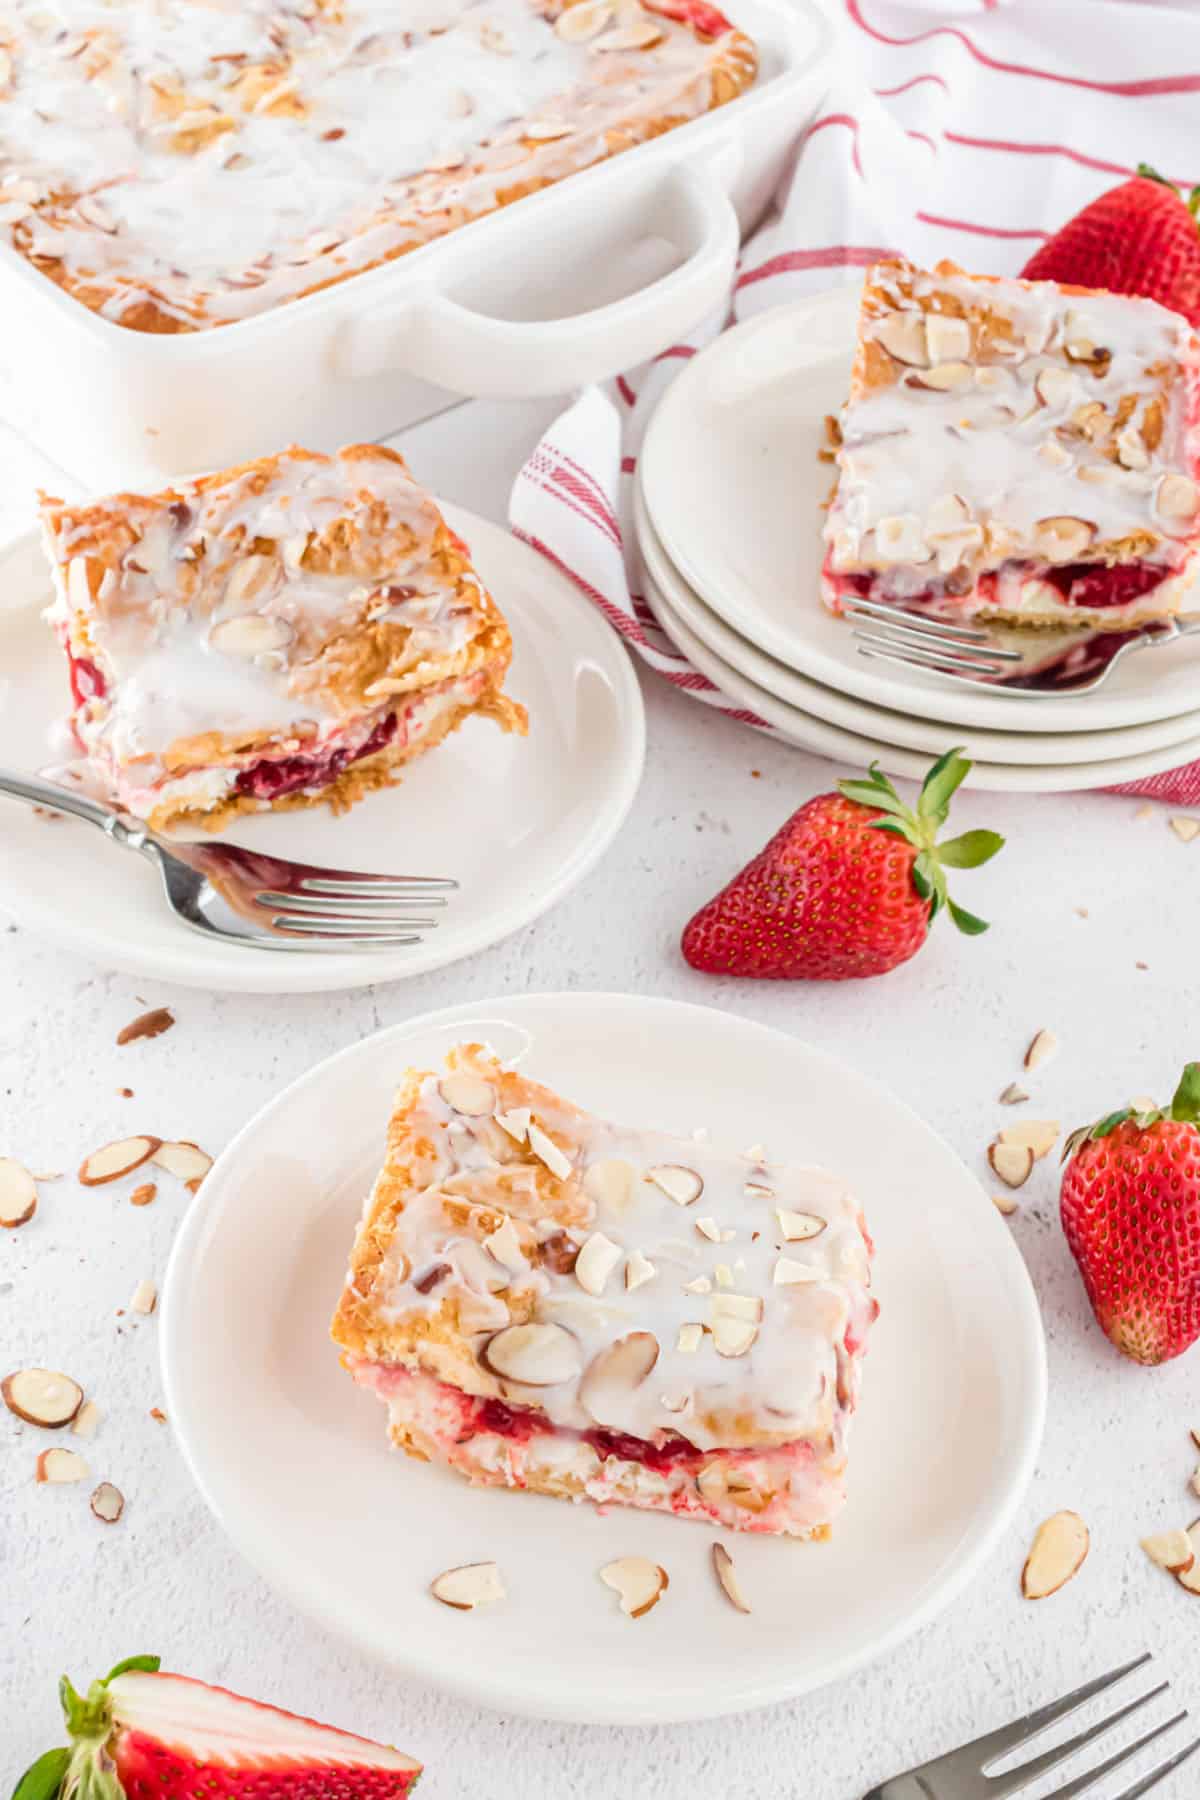 Slices of strawberry cream cheese bars on white plates.